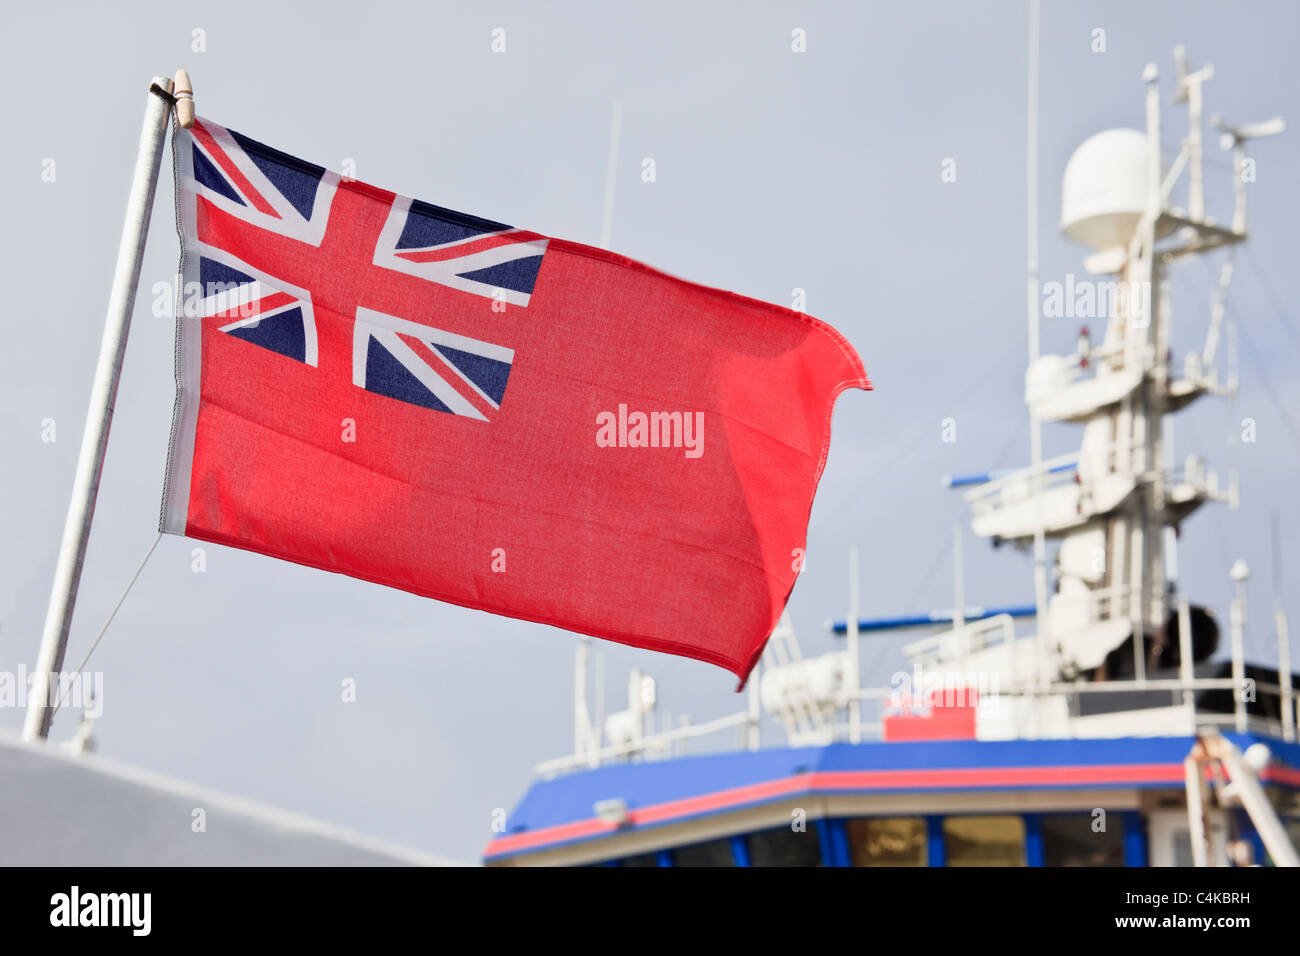 UK, Britain. Red Royal Ensign flag on a Merchant Navy vessel Stock Photo